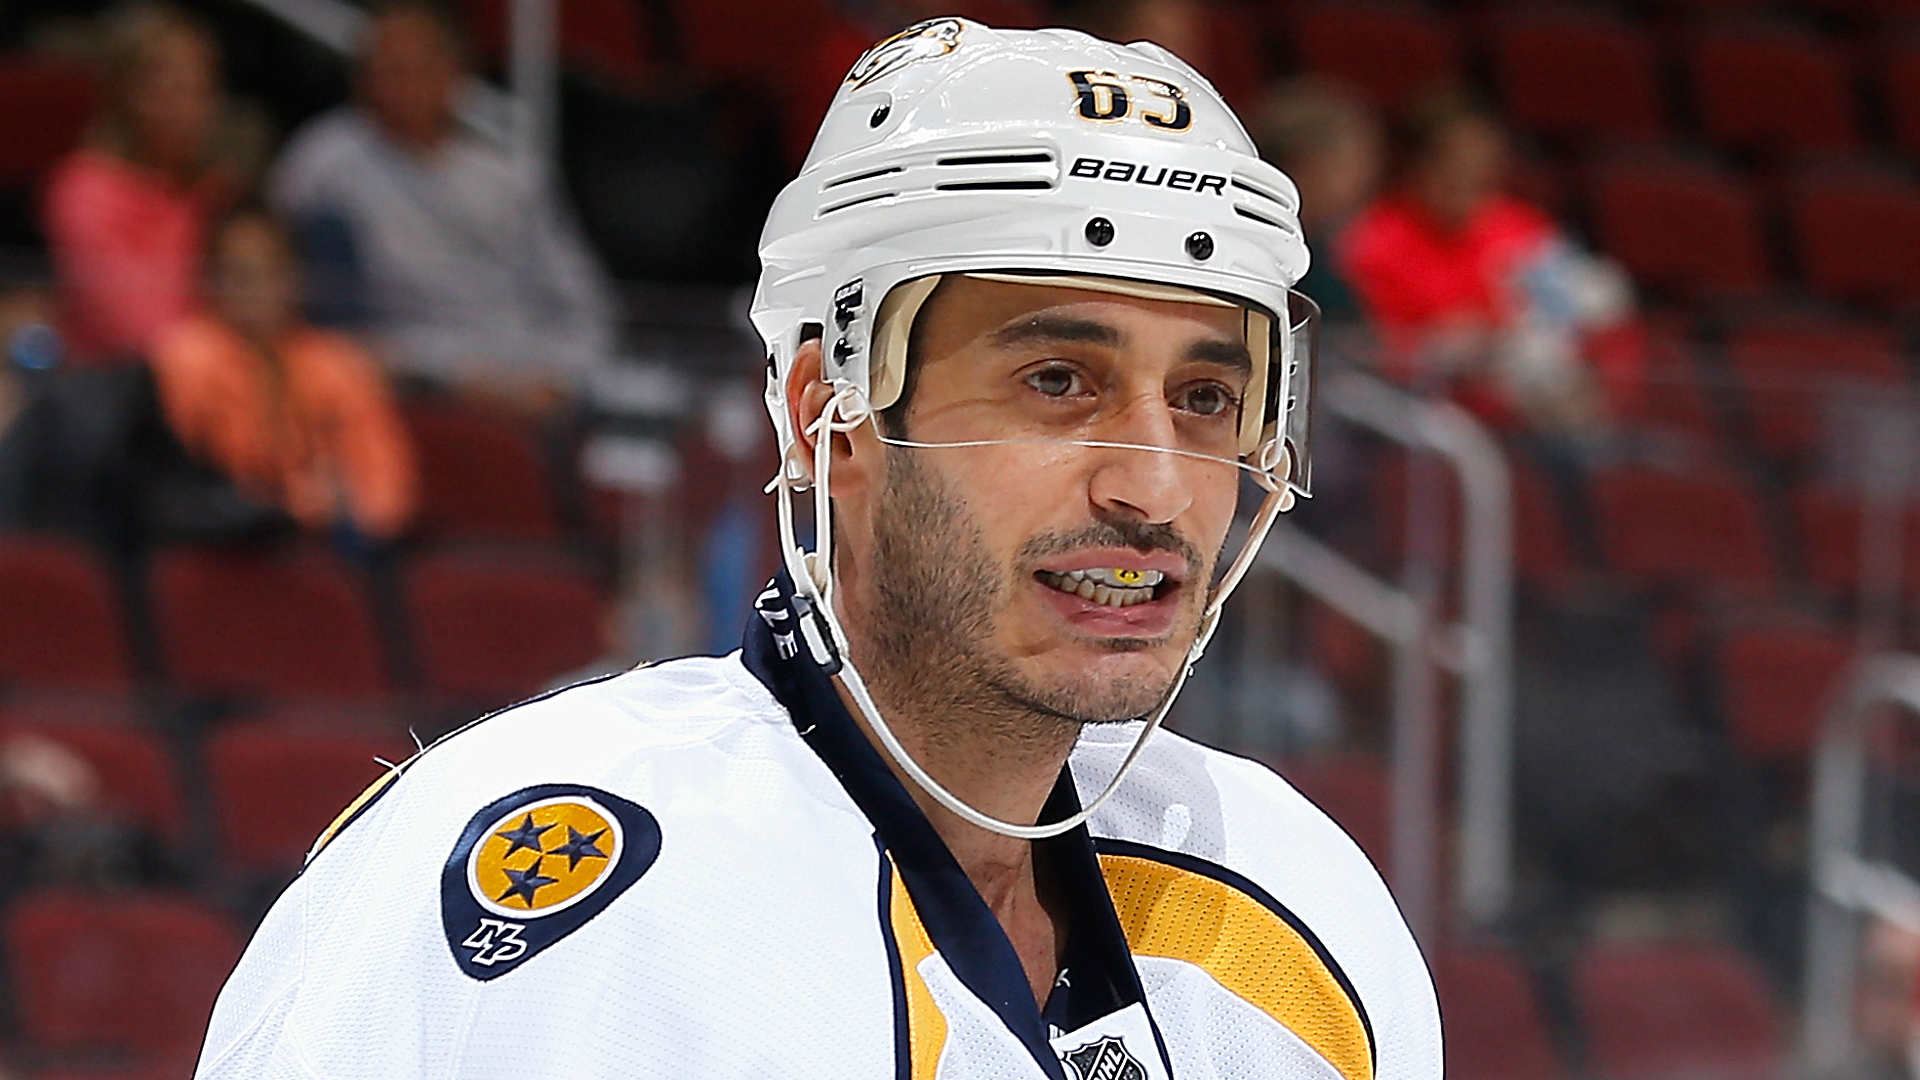 Predators' Mike Ribeiro settles with sexual assault accuser NHL